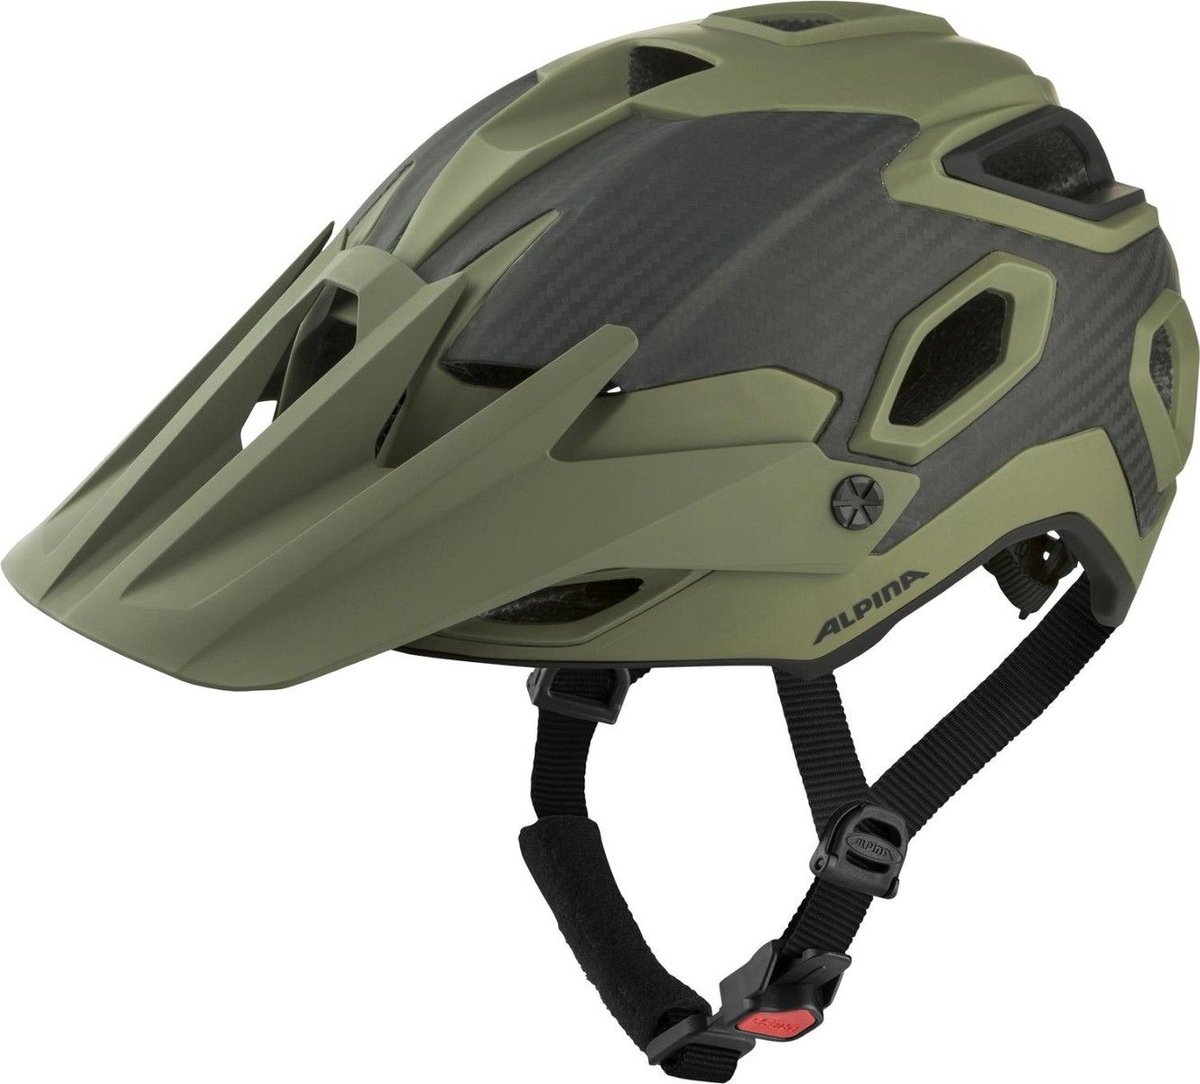 Kask rowerowy Alpina Rootage A9718 r.57-62